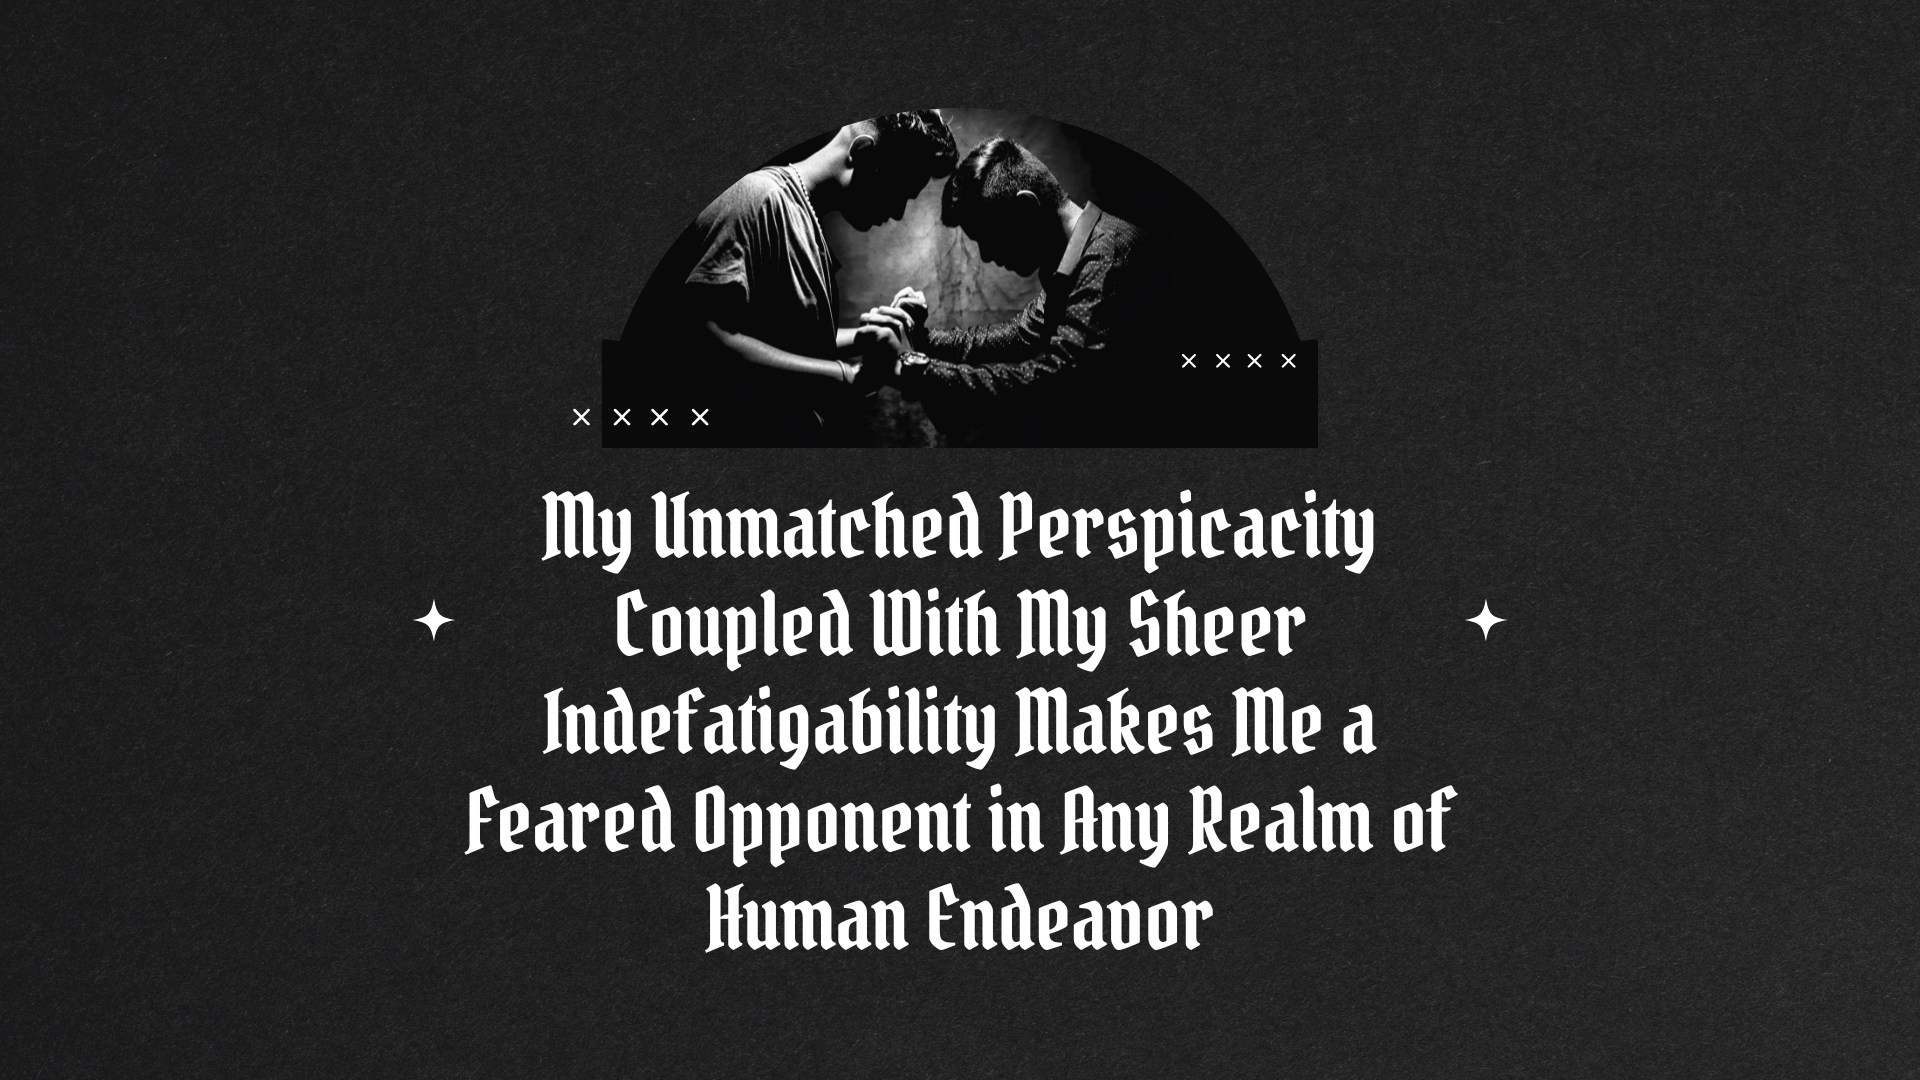 Emory tate quote- My unmatched perspicacity coupled with sheer  indefatigability makes me a feared opponent in any real of human endeavour  Sticker for Sale by Tautvydas